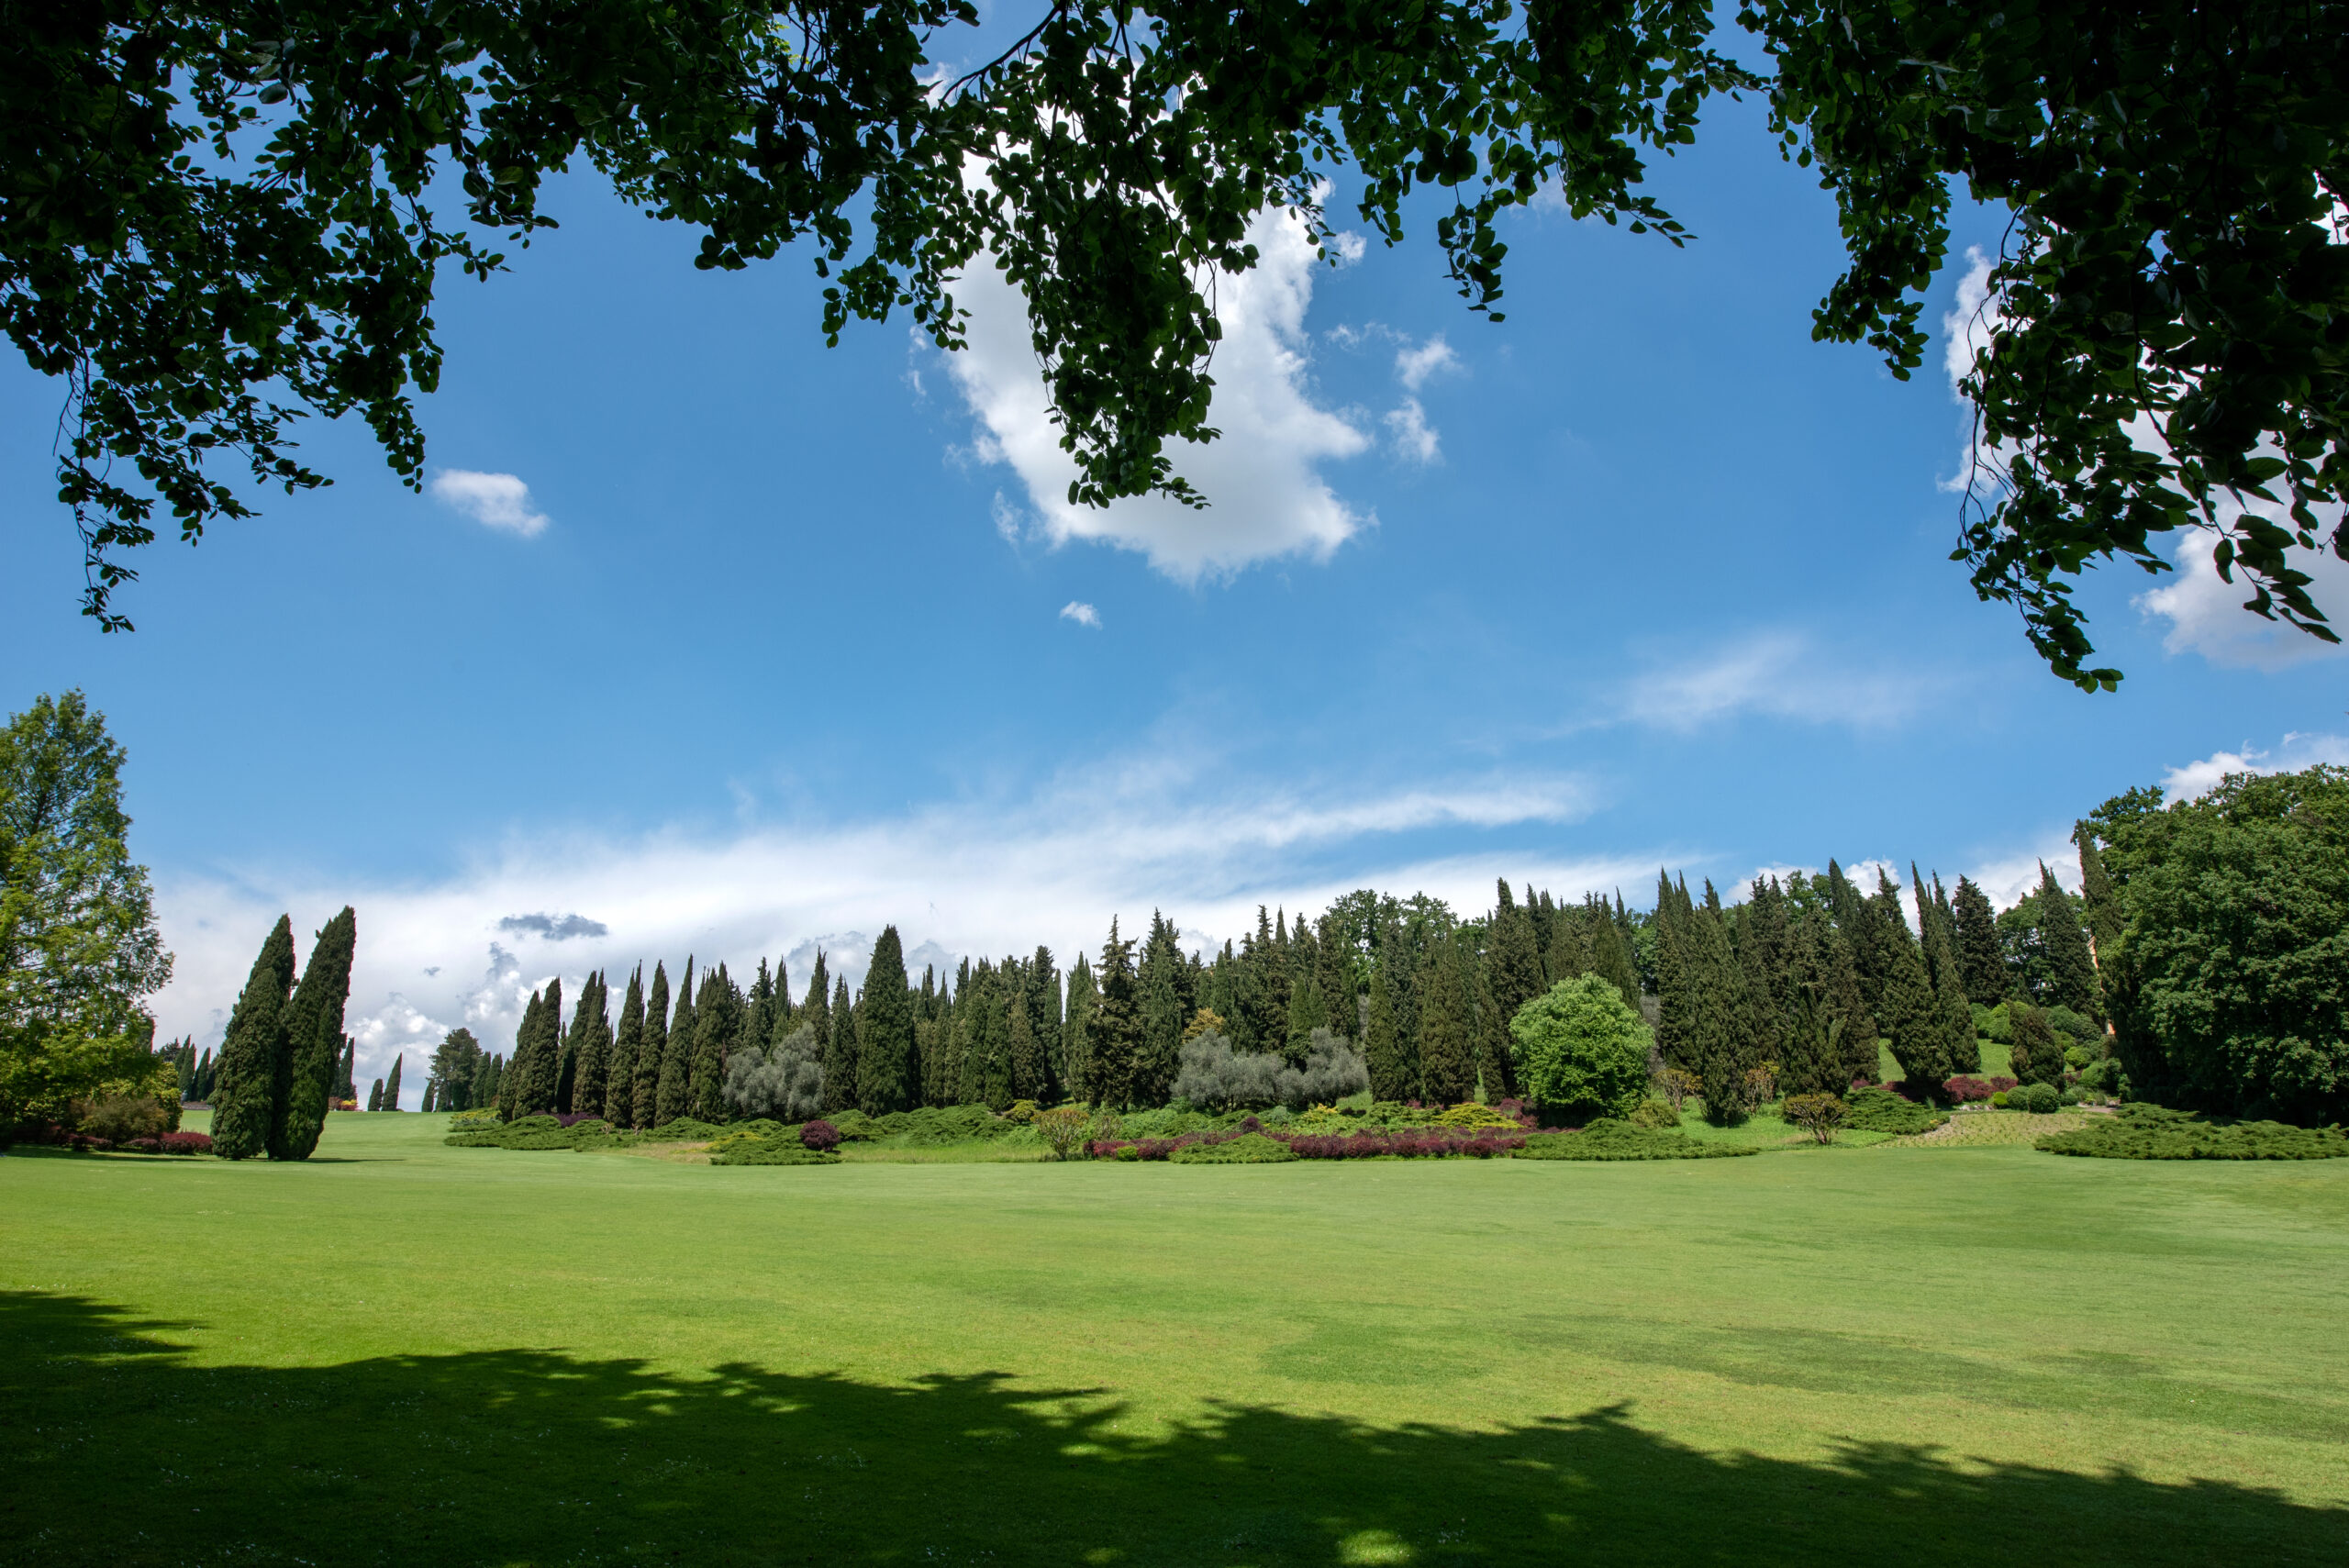 Large open garden with evergreen Cypress trees viewed over a neat manicured lawn of green grass under a sunny blue sky with clouds in a scenic landscape